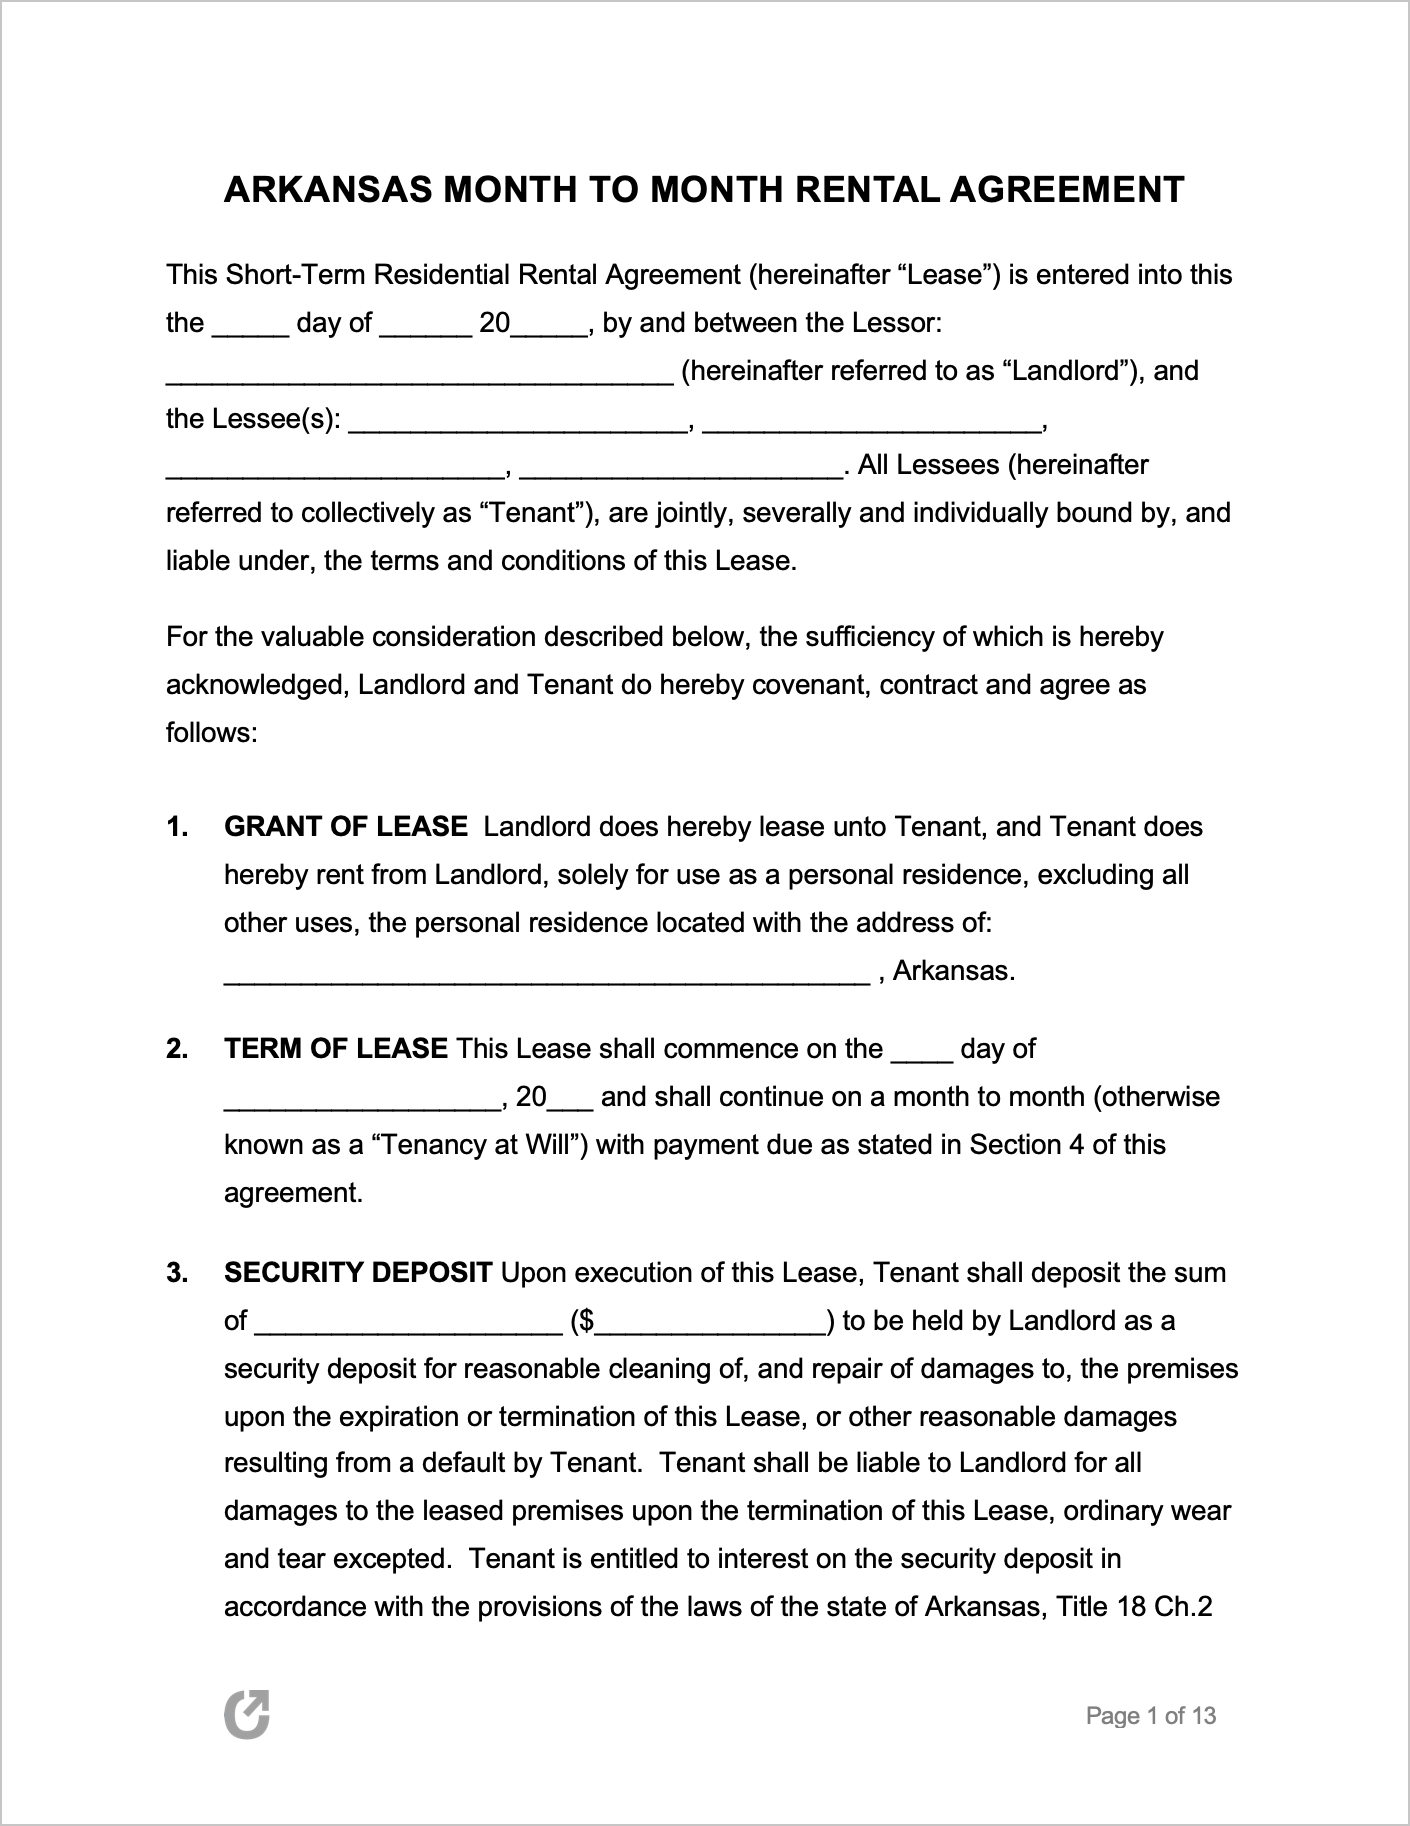 Free Arkansas Month to Month Lease Agreement PDF WORD RTF